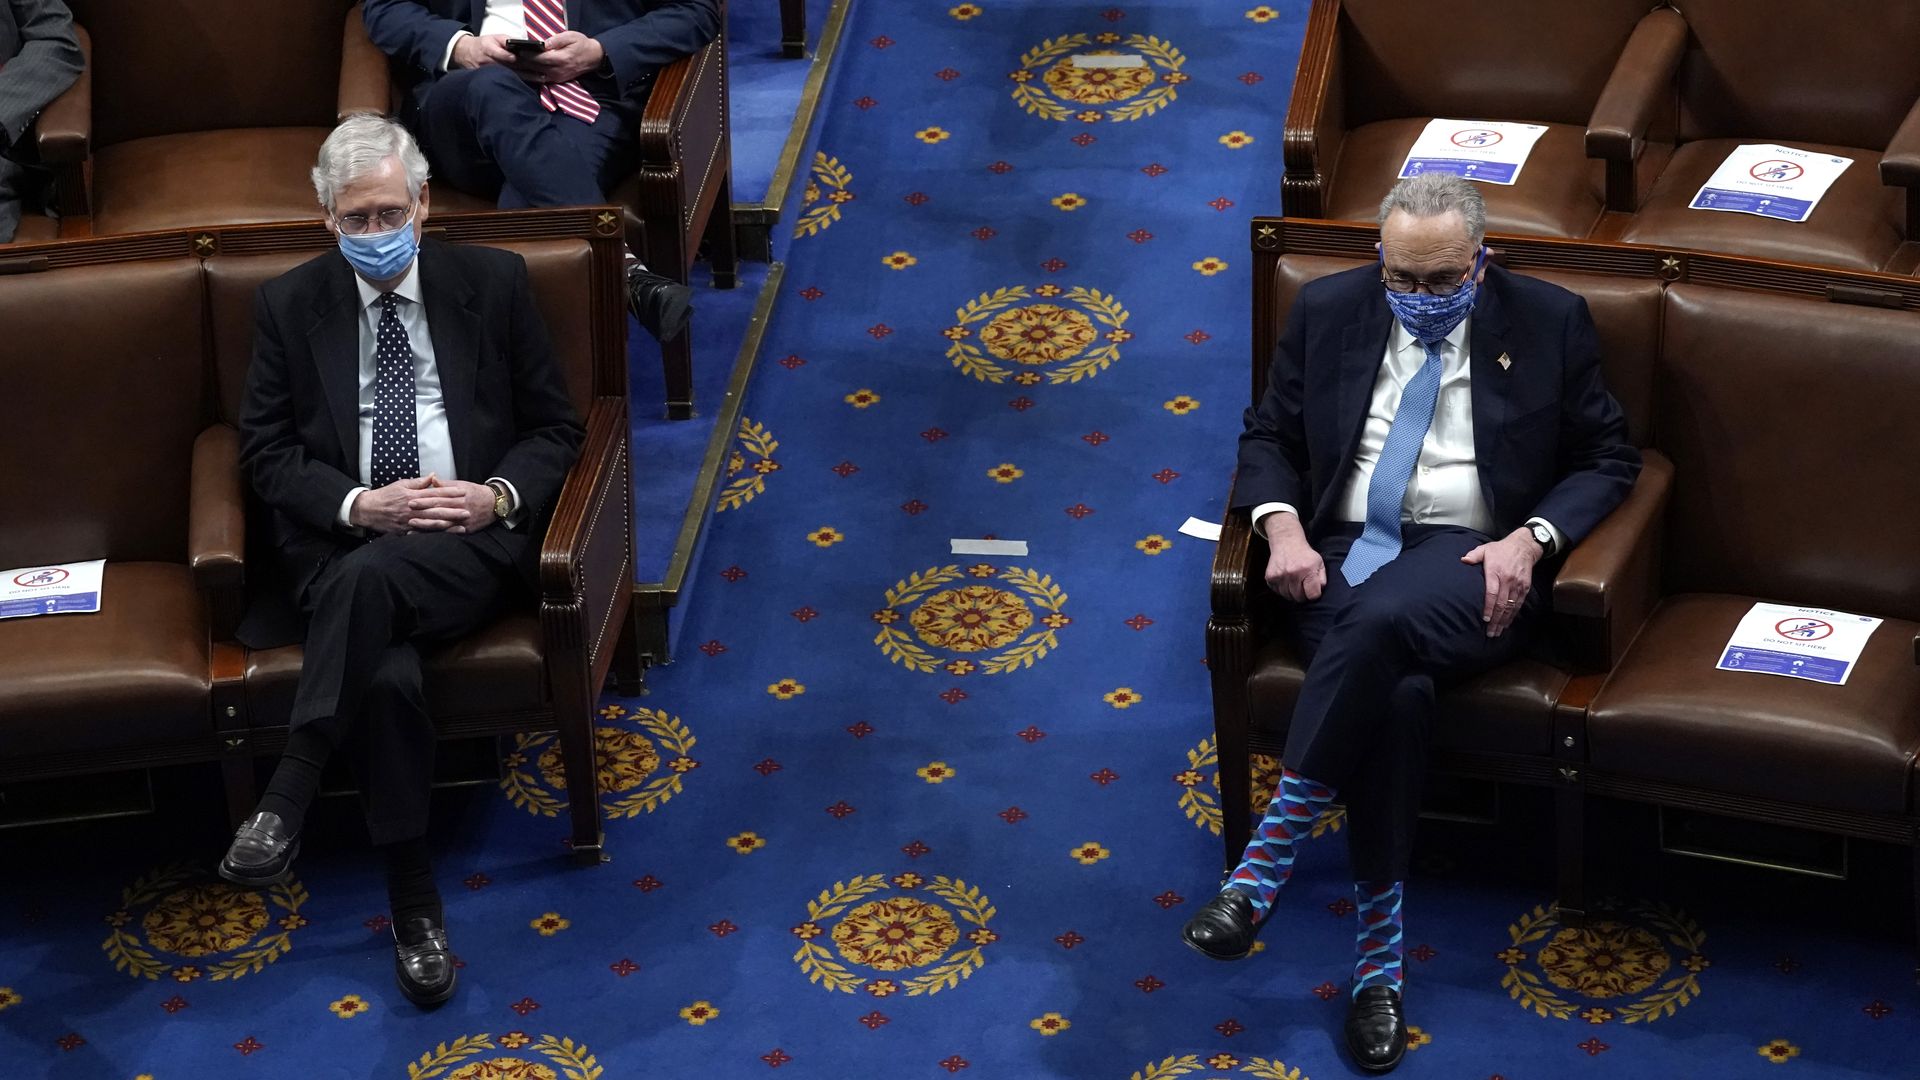 Mitch McConnell and Chuck Schumer are seen sitting across from one another in the Senate.